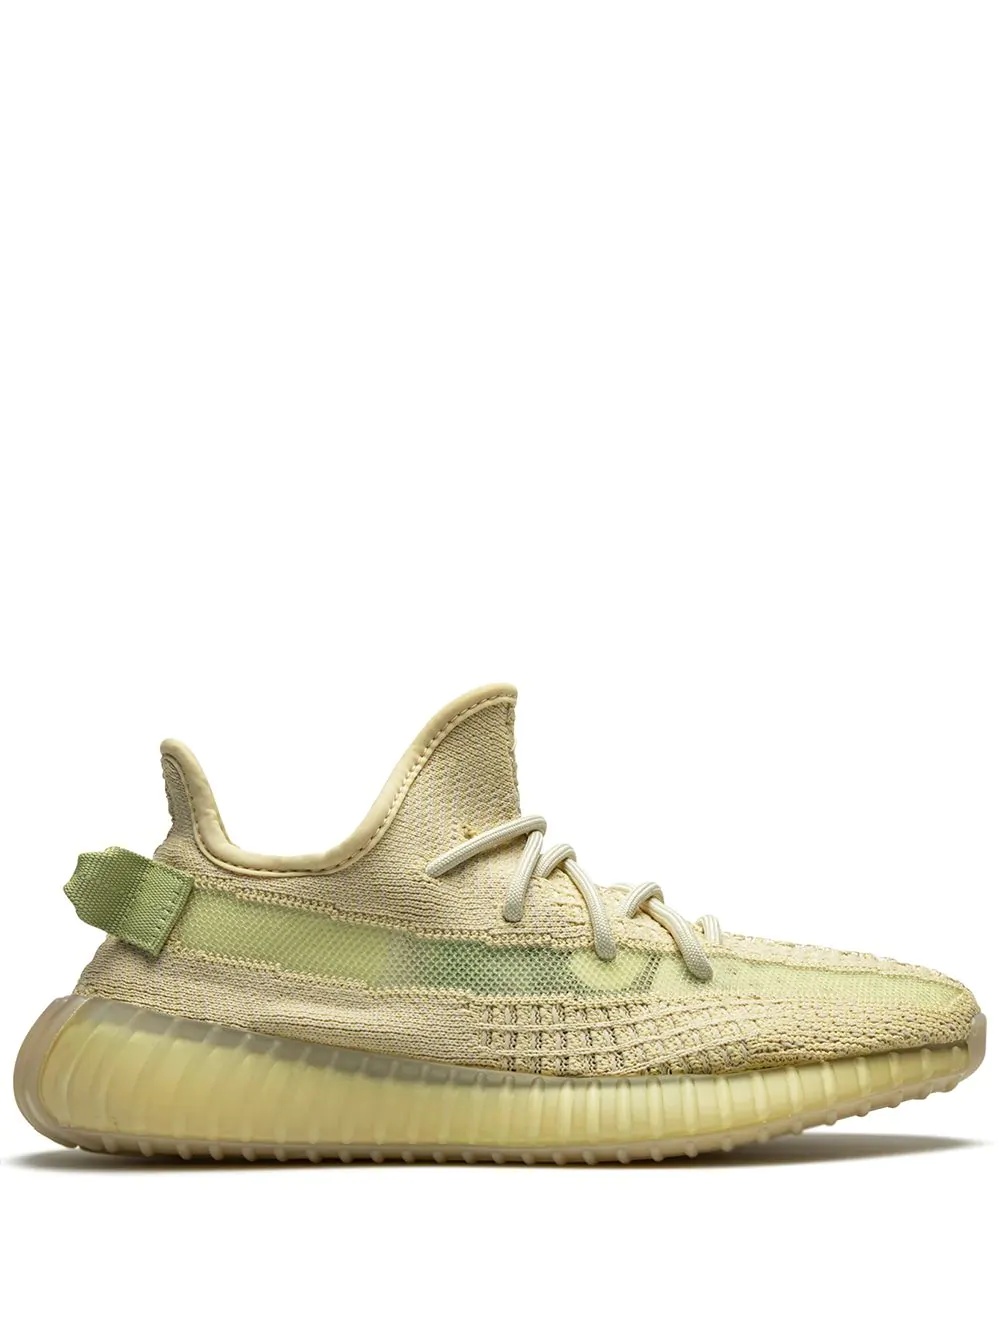 Yeezy Boost 350 V2 'Flax' sneakers - 1